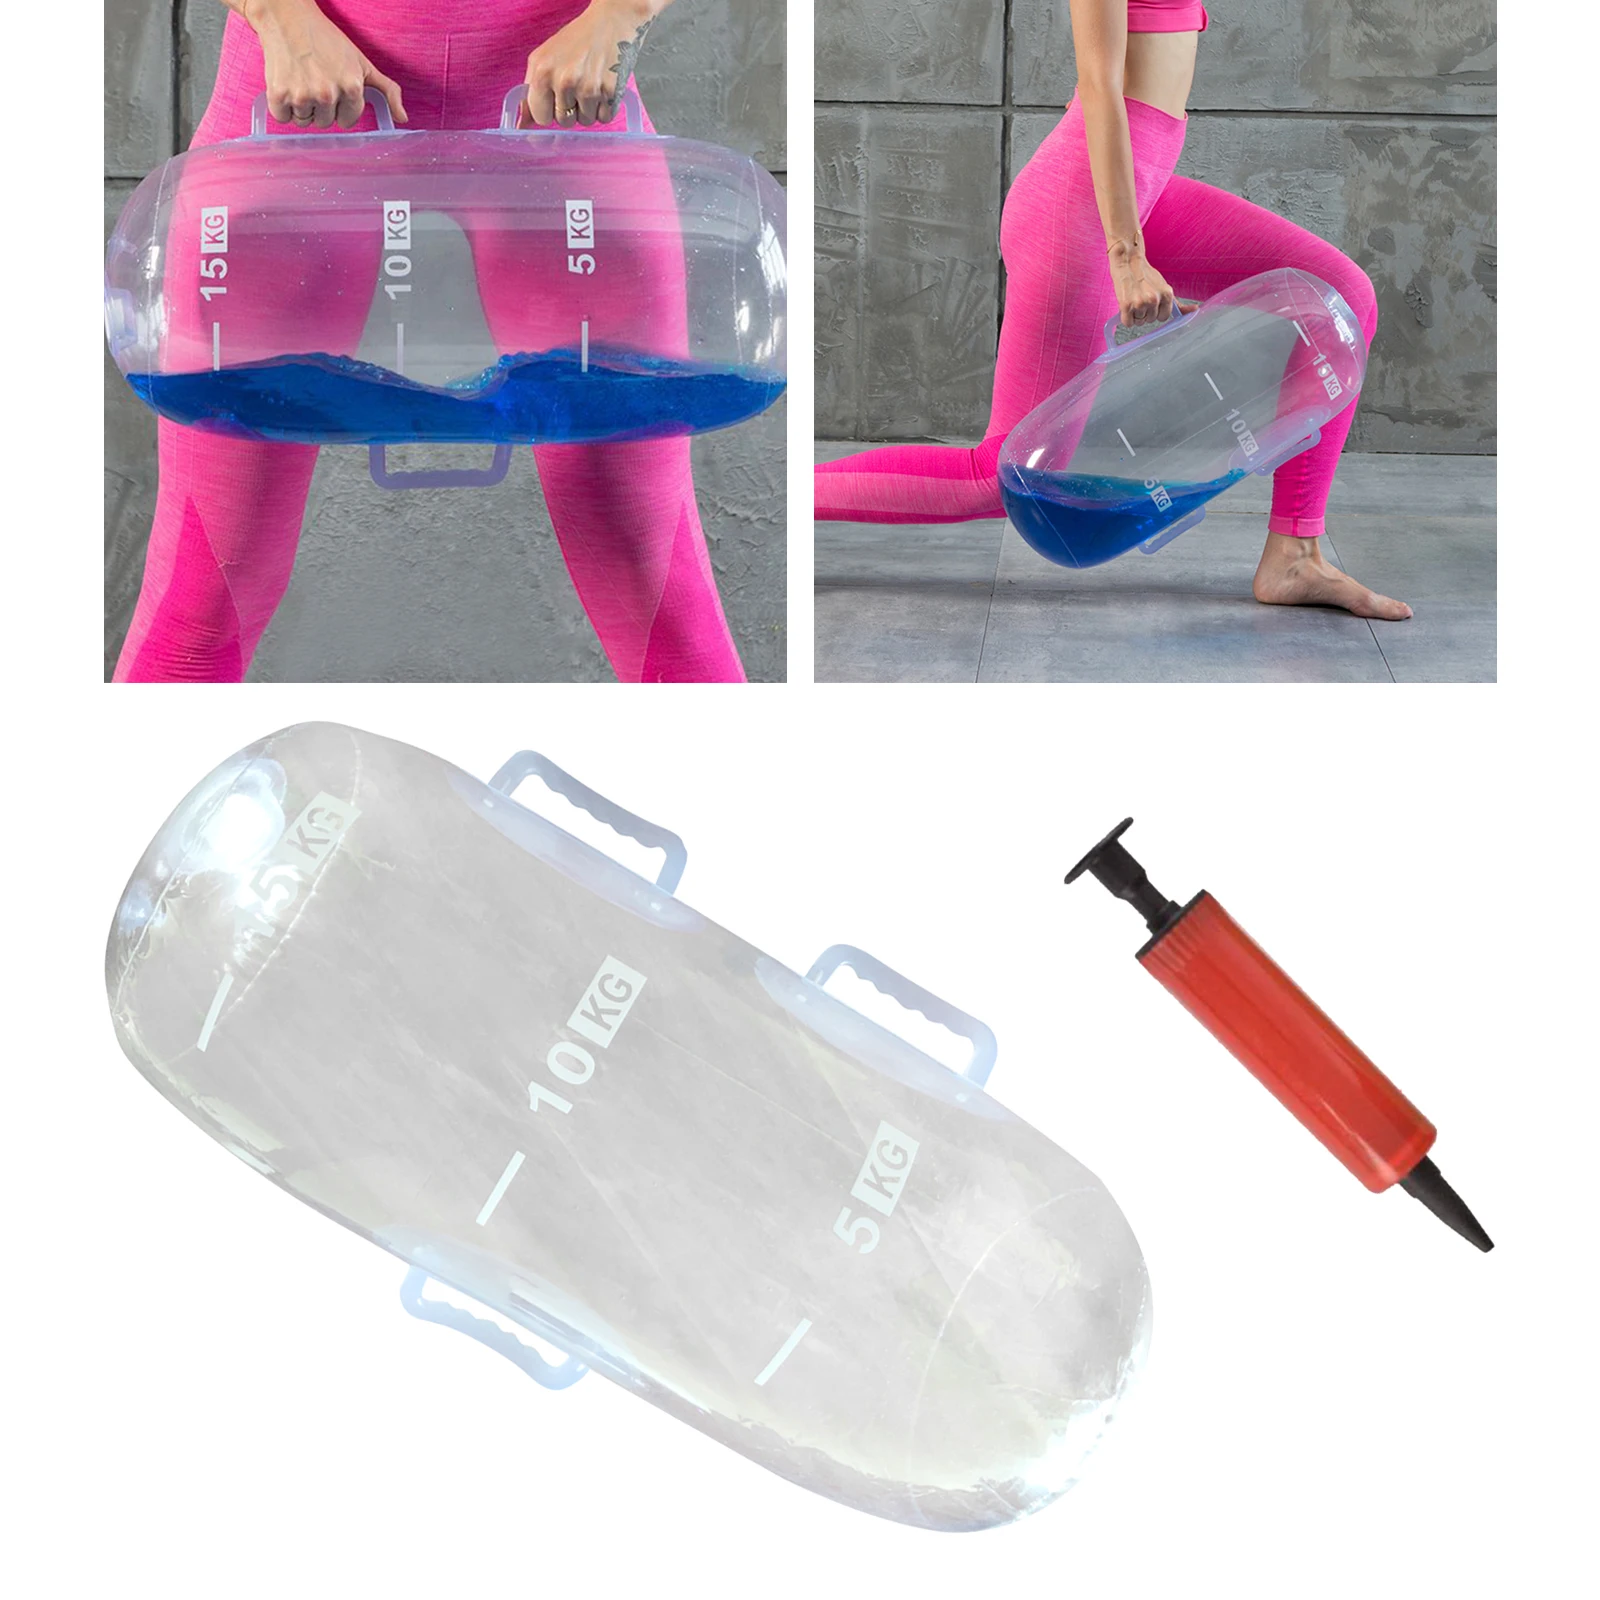 Training Power Bag Water Portable Equipment Physical for Gym Home Full Body